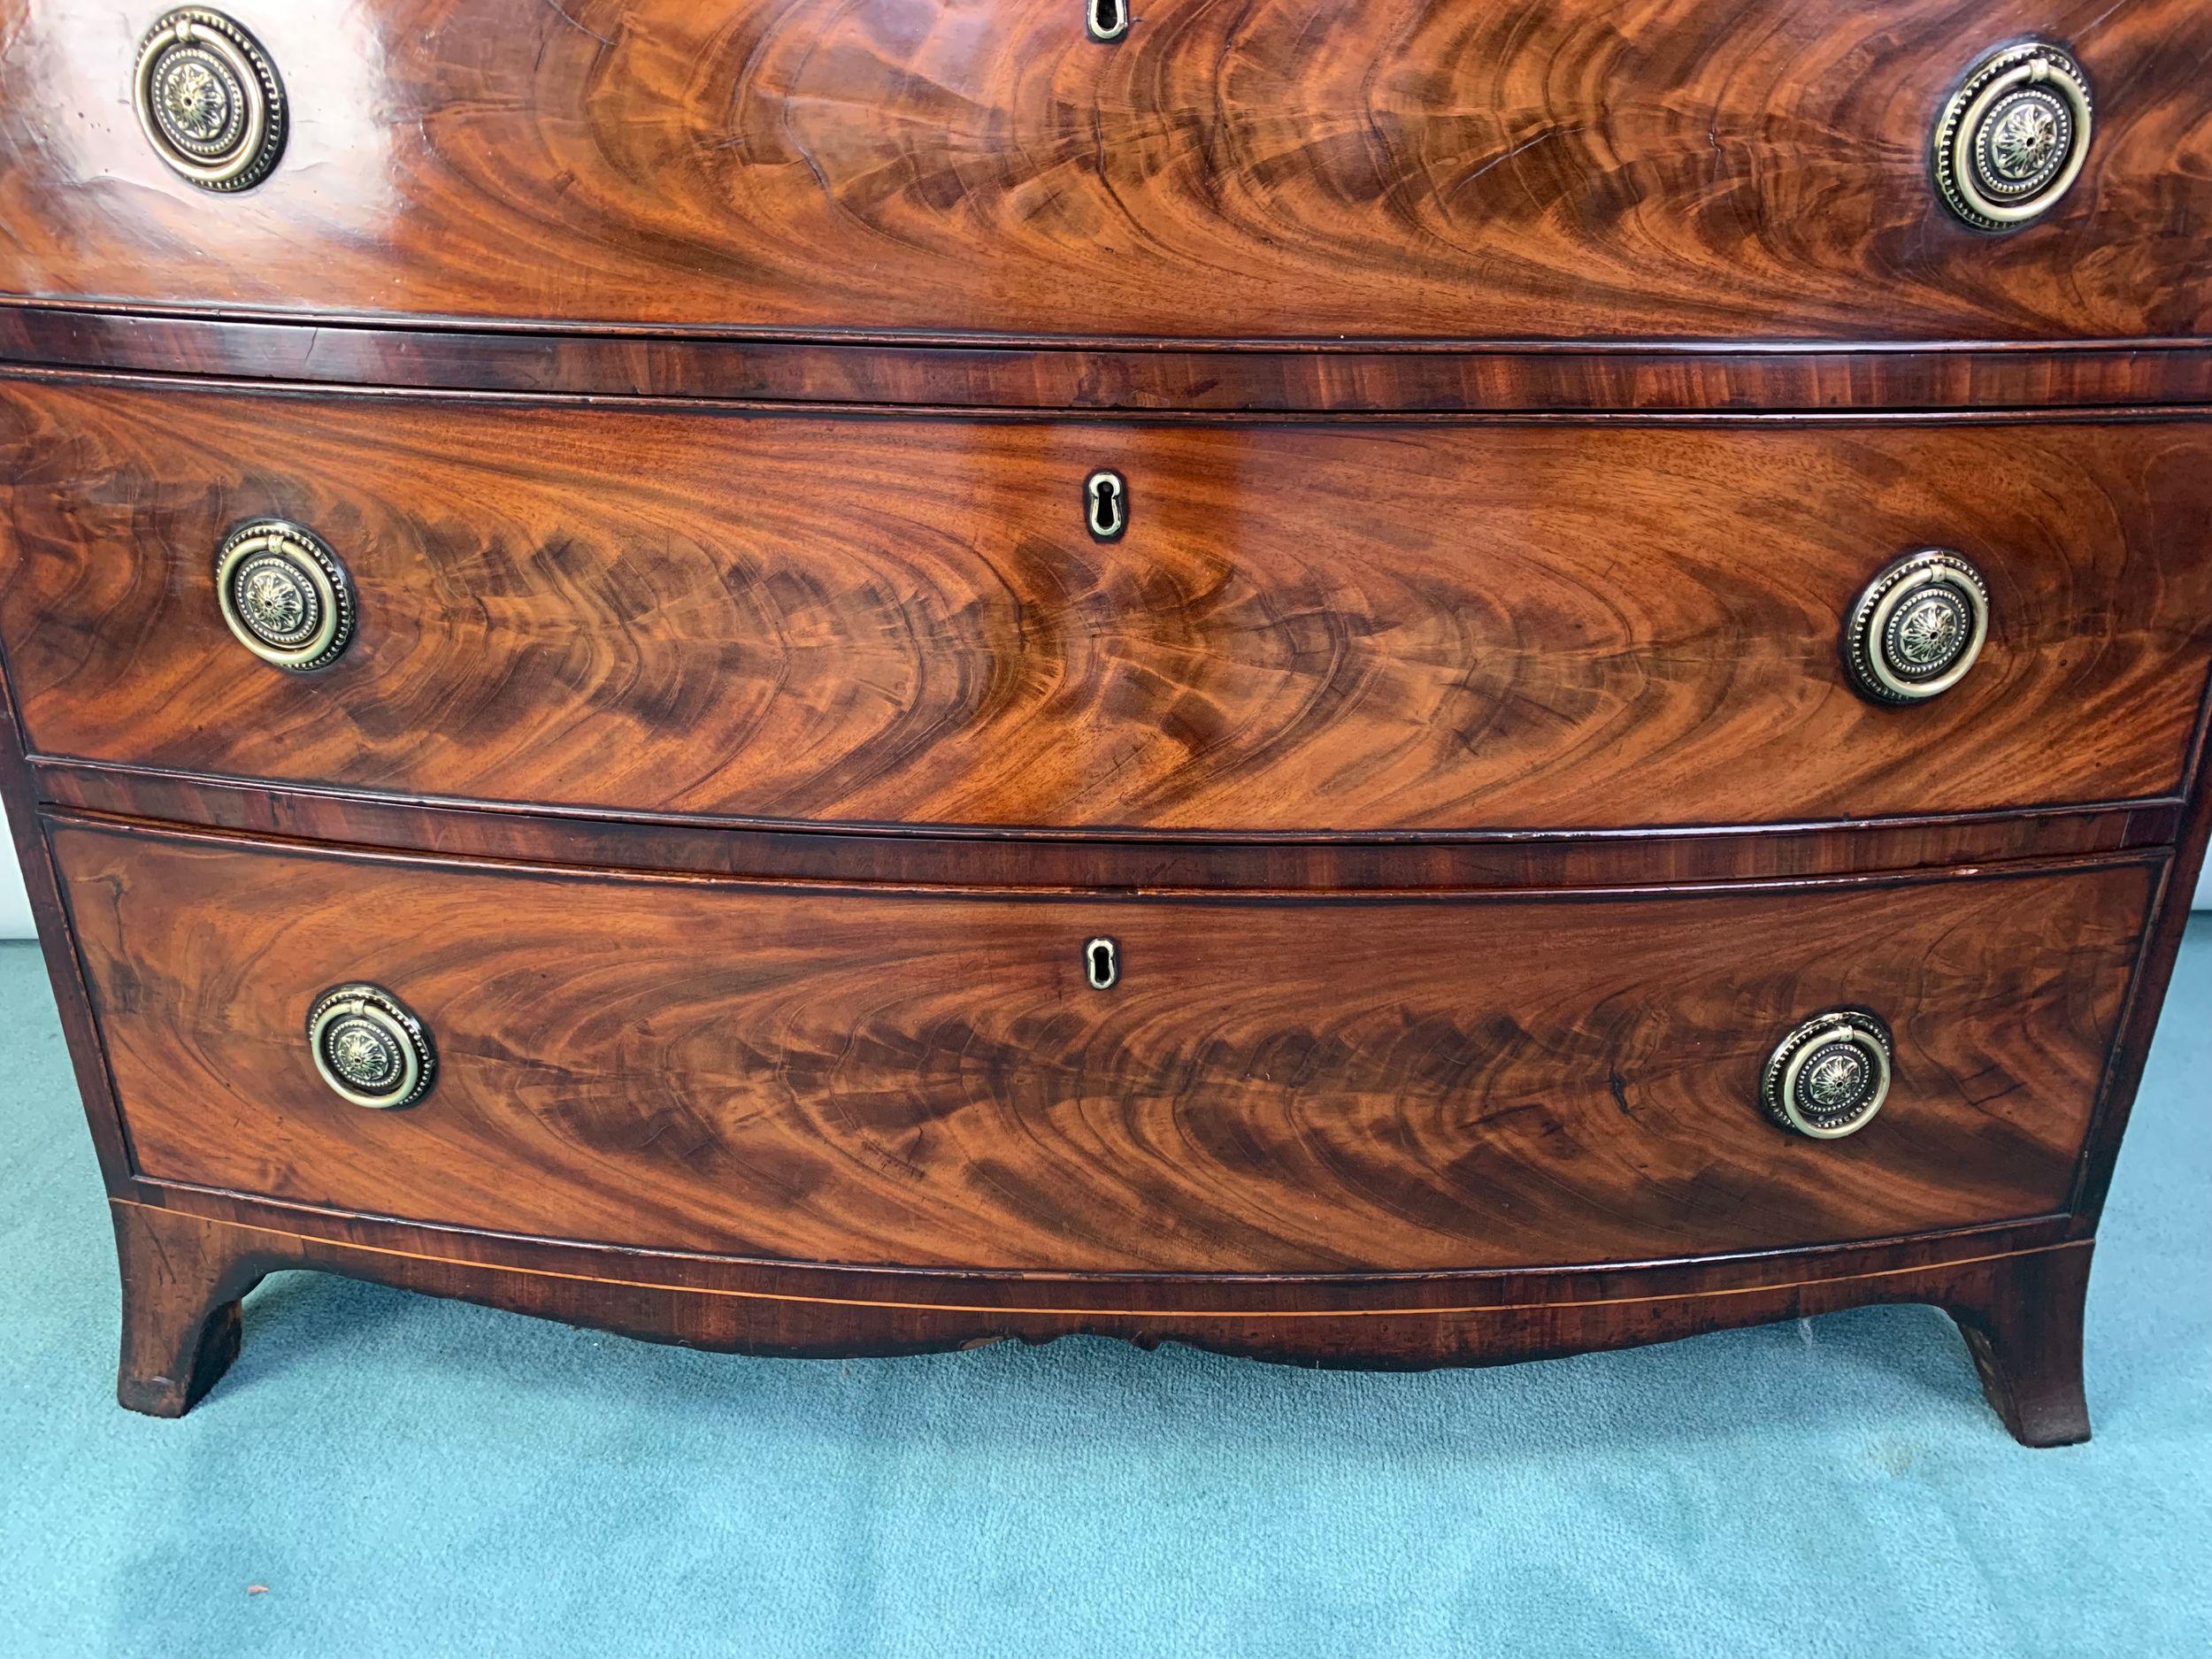 A superior quality George III period flame figured mahogany chest of four graduated drawers of exceptional colour and beautifully figured surfaces. Standing on splayed feet with shaped apron between. Drawer are lined in cedarwood and the locks and